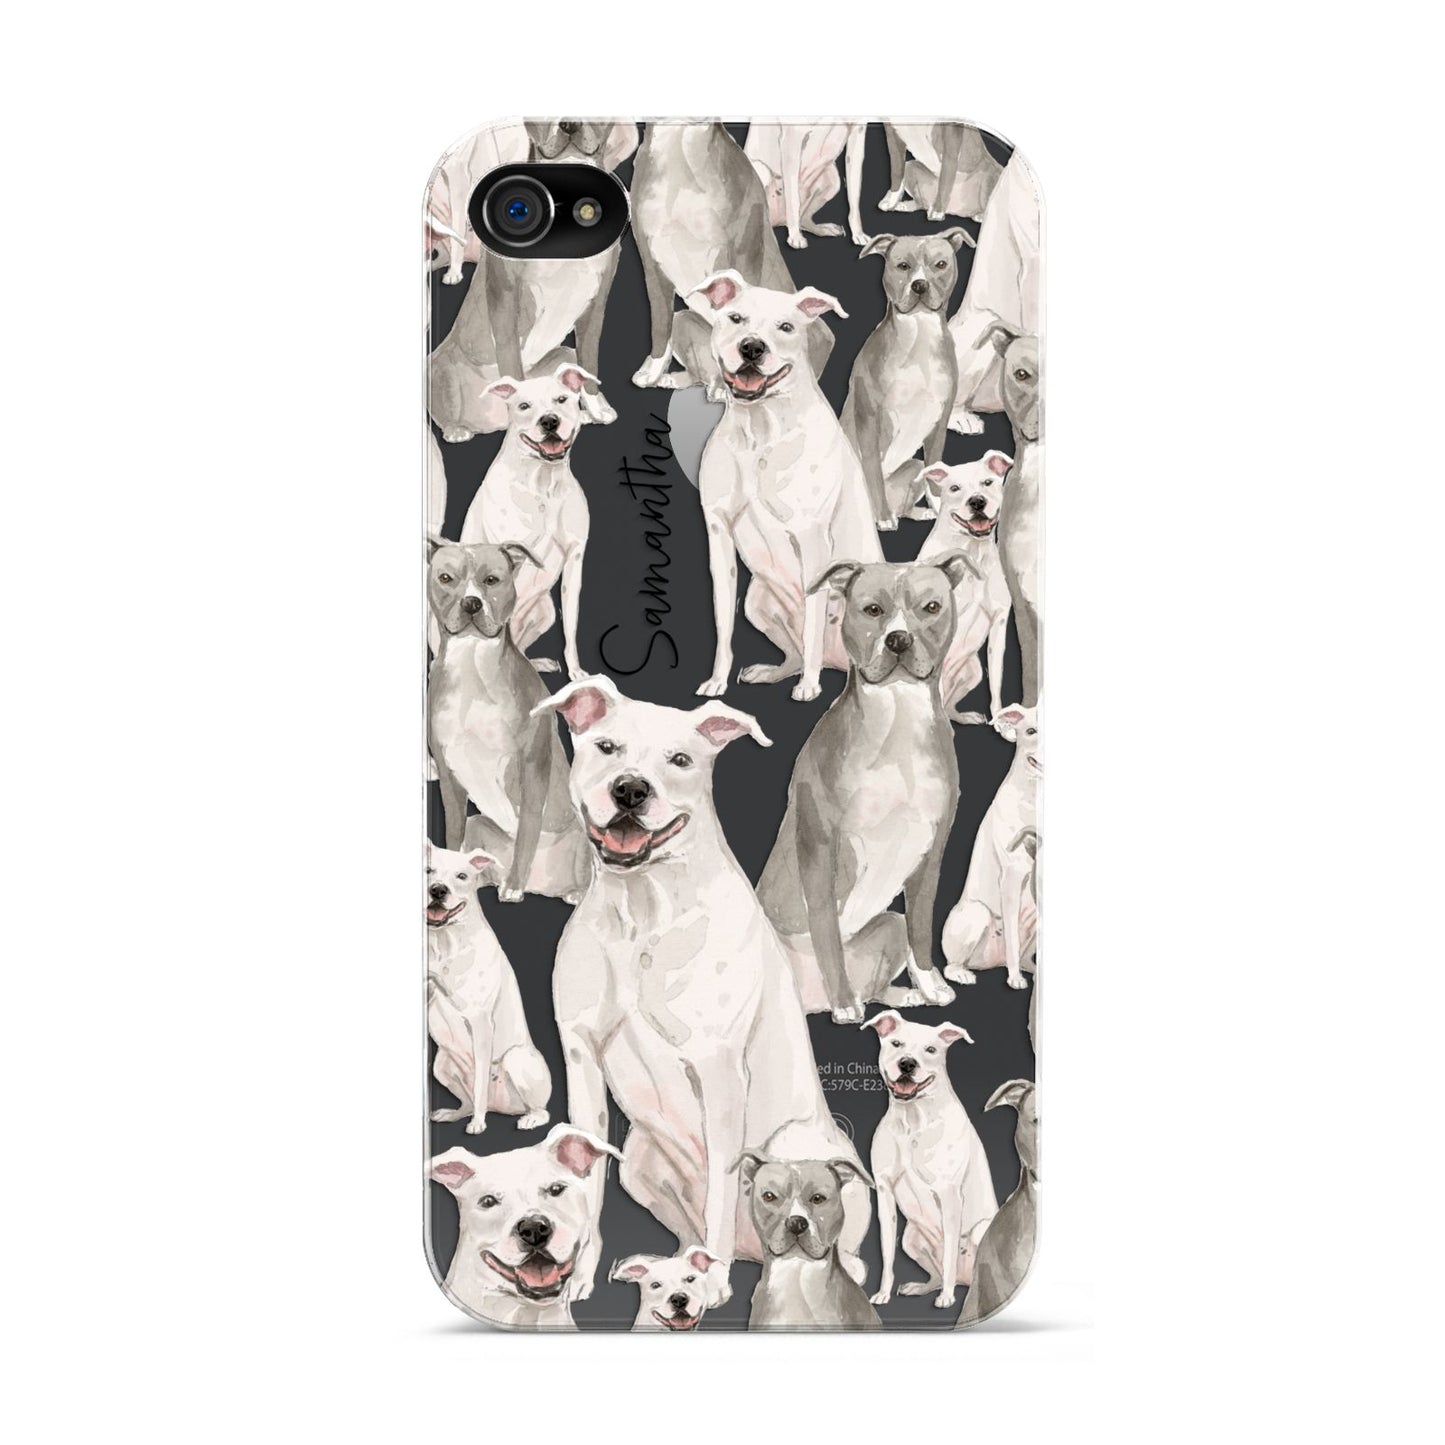 Personalised Staffordshire Dog Apple iPhone 4s Case